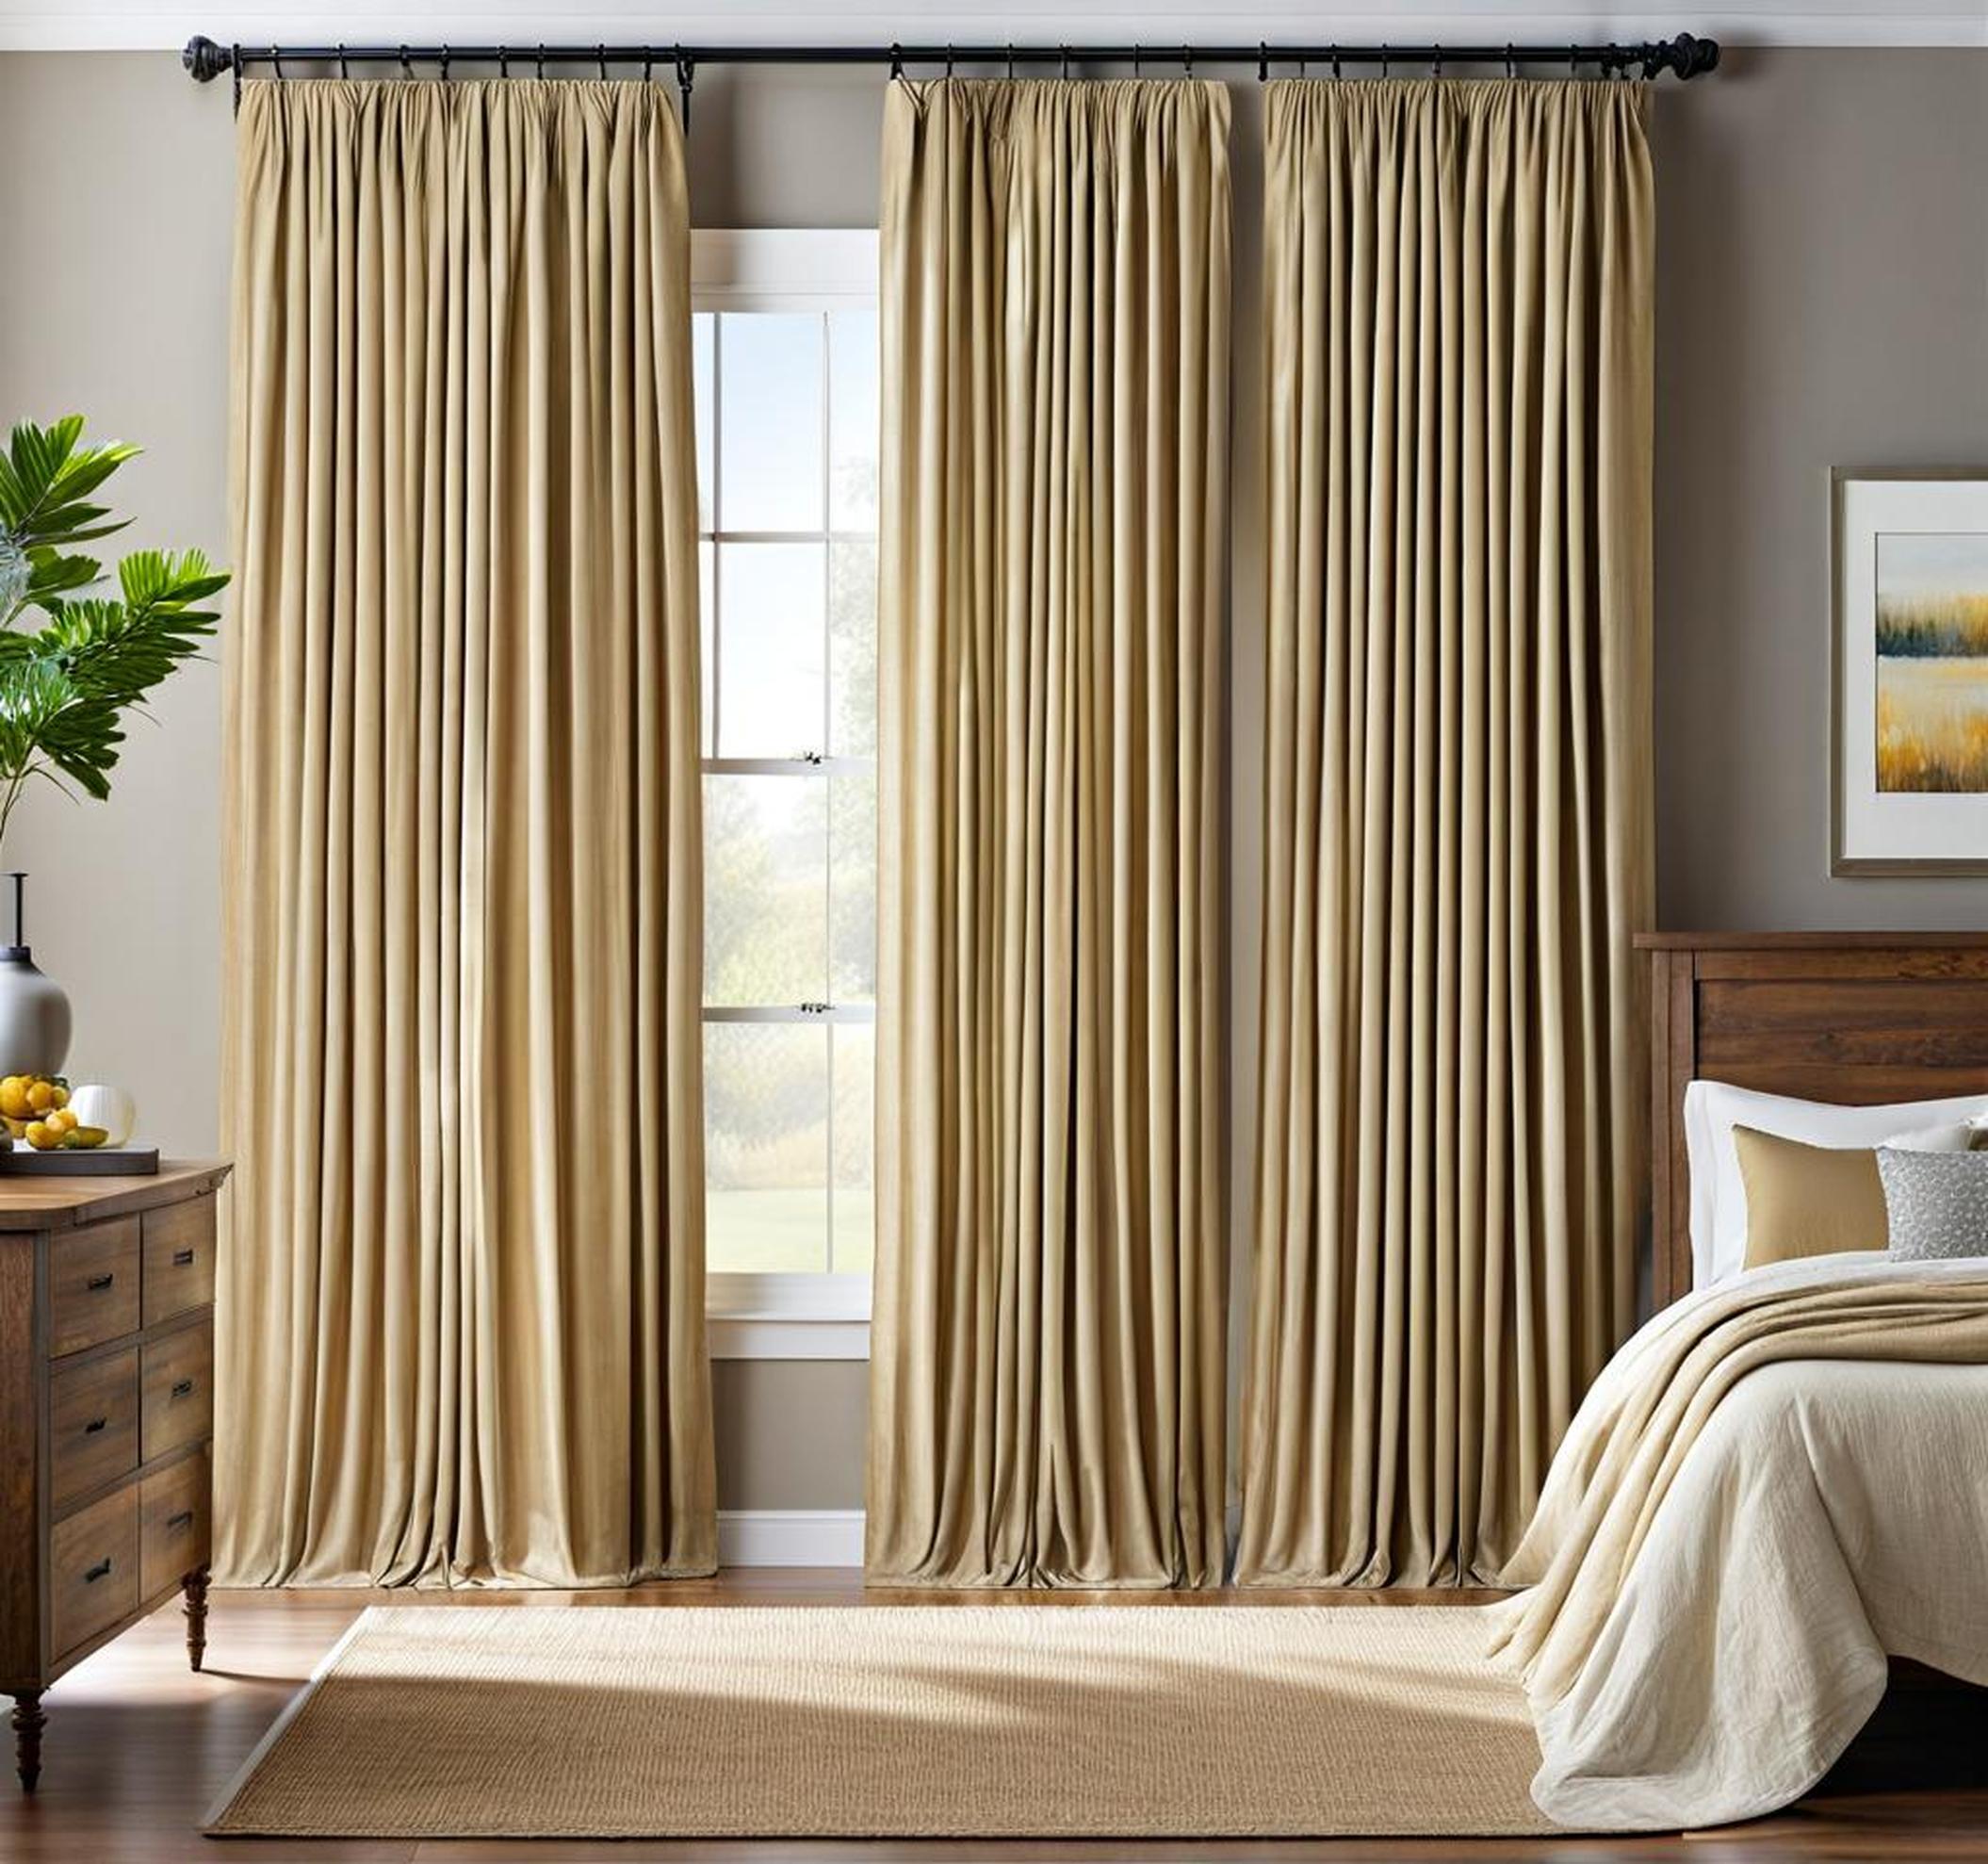 curtains for rustic bedroom